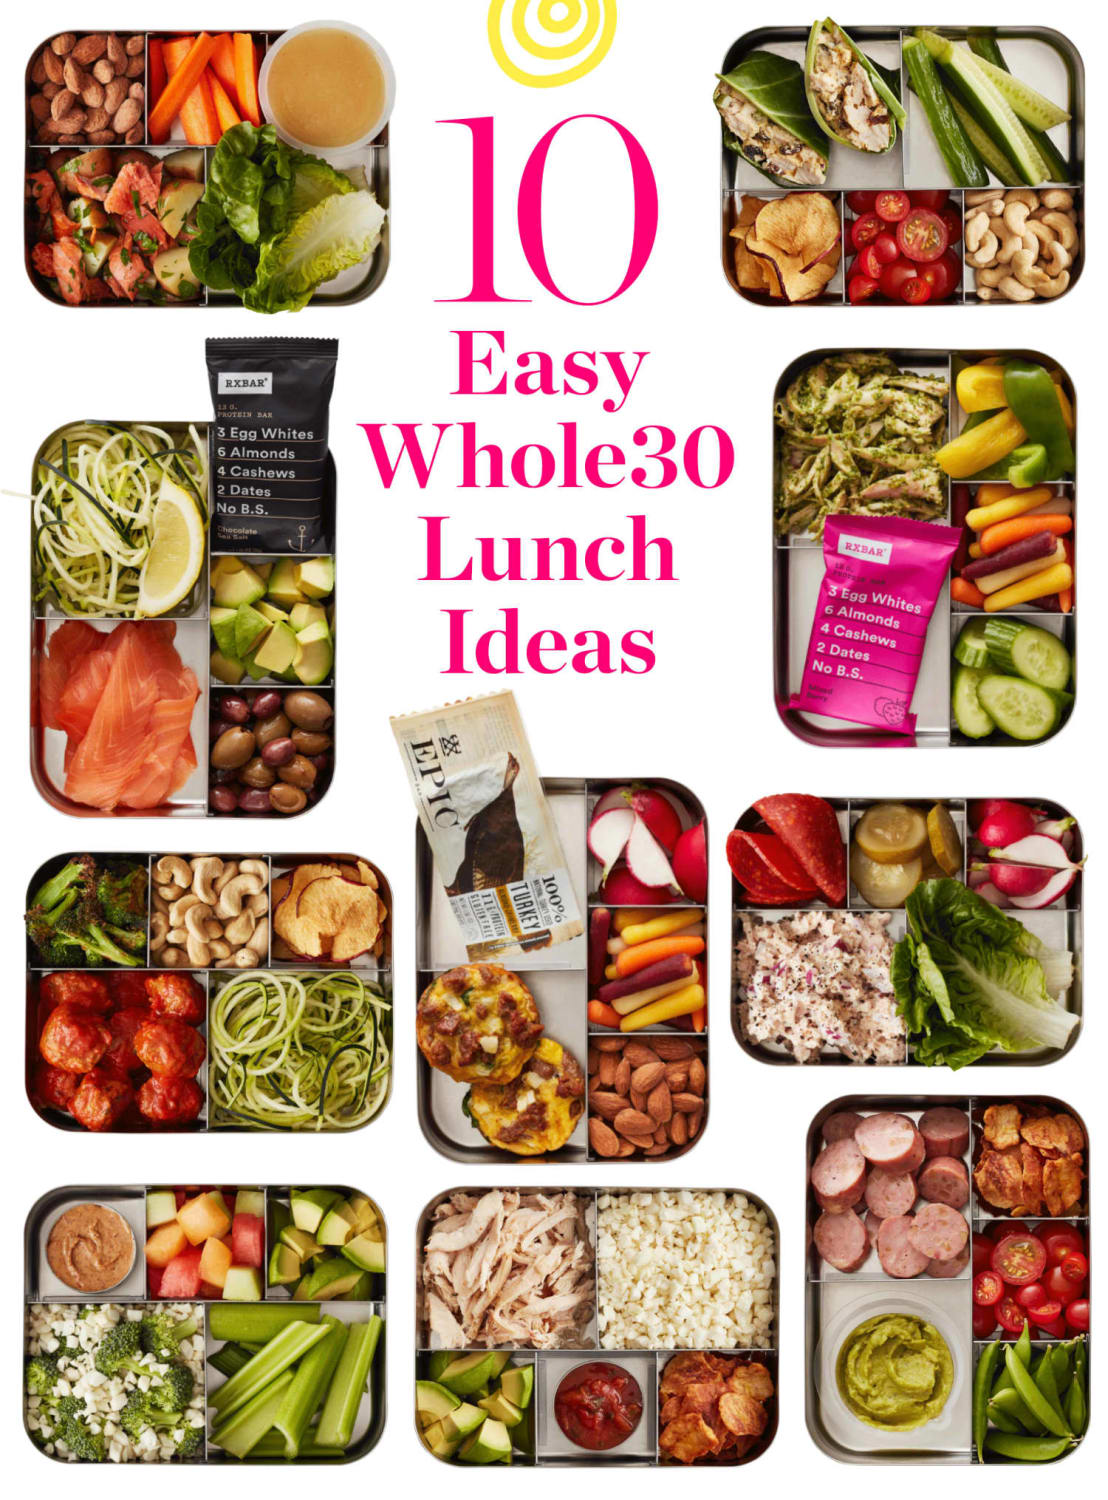 10 Easy Whole30 Lunch Ideas